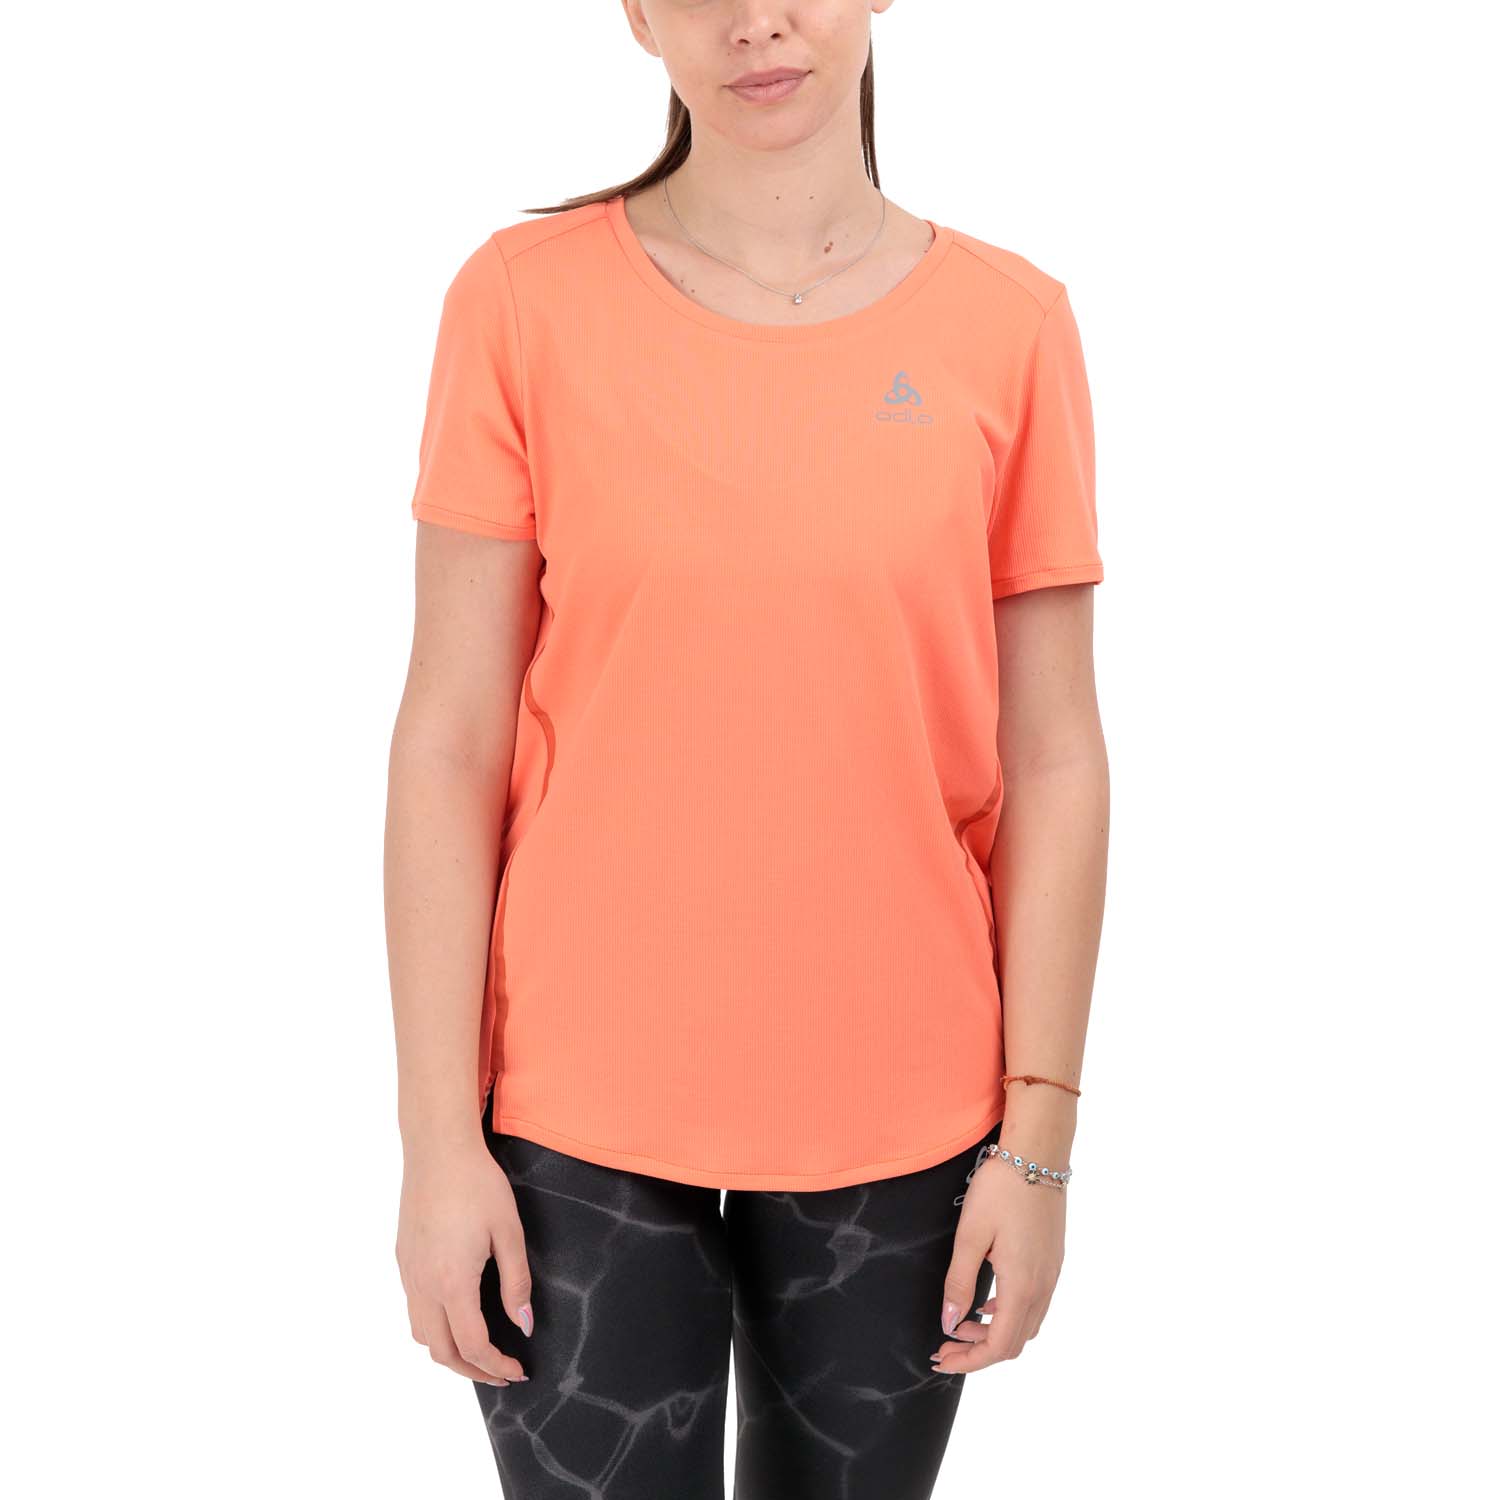 Odlo Zeroweight Chill Tec T-Shirt - Living Coral